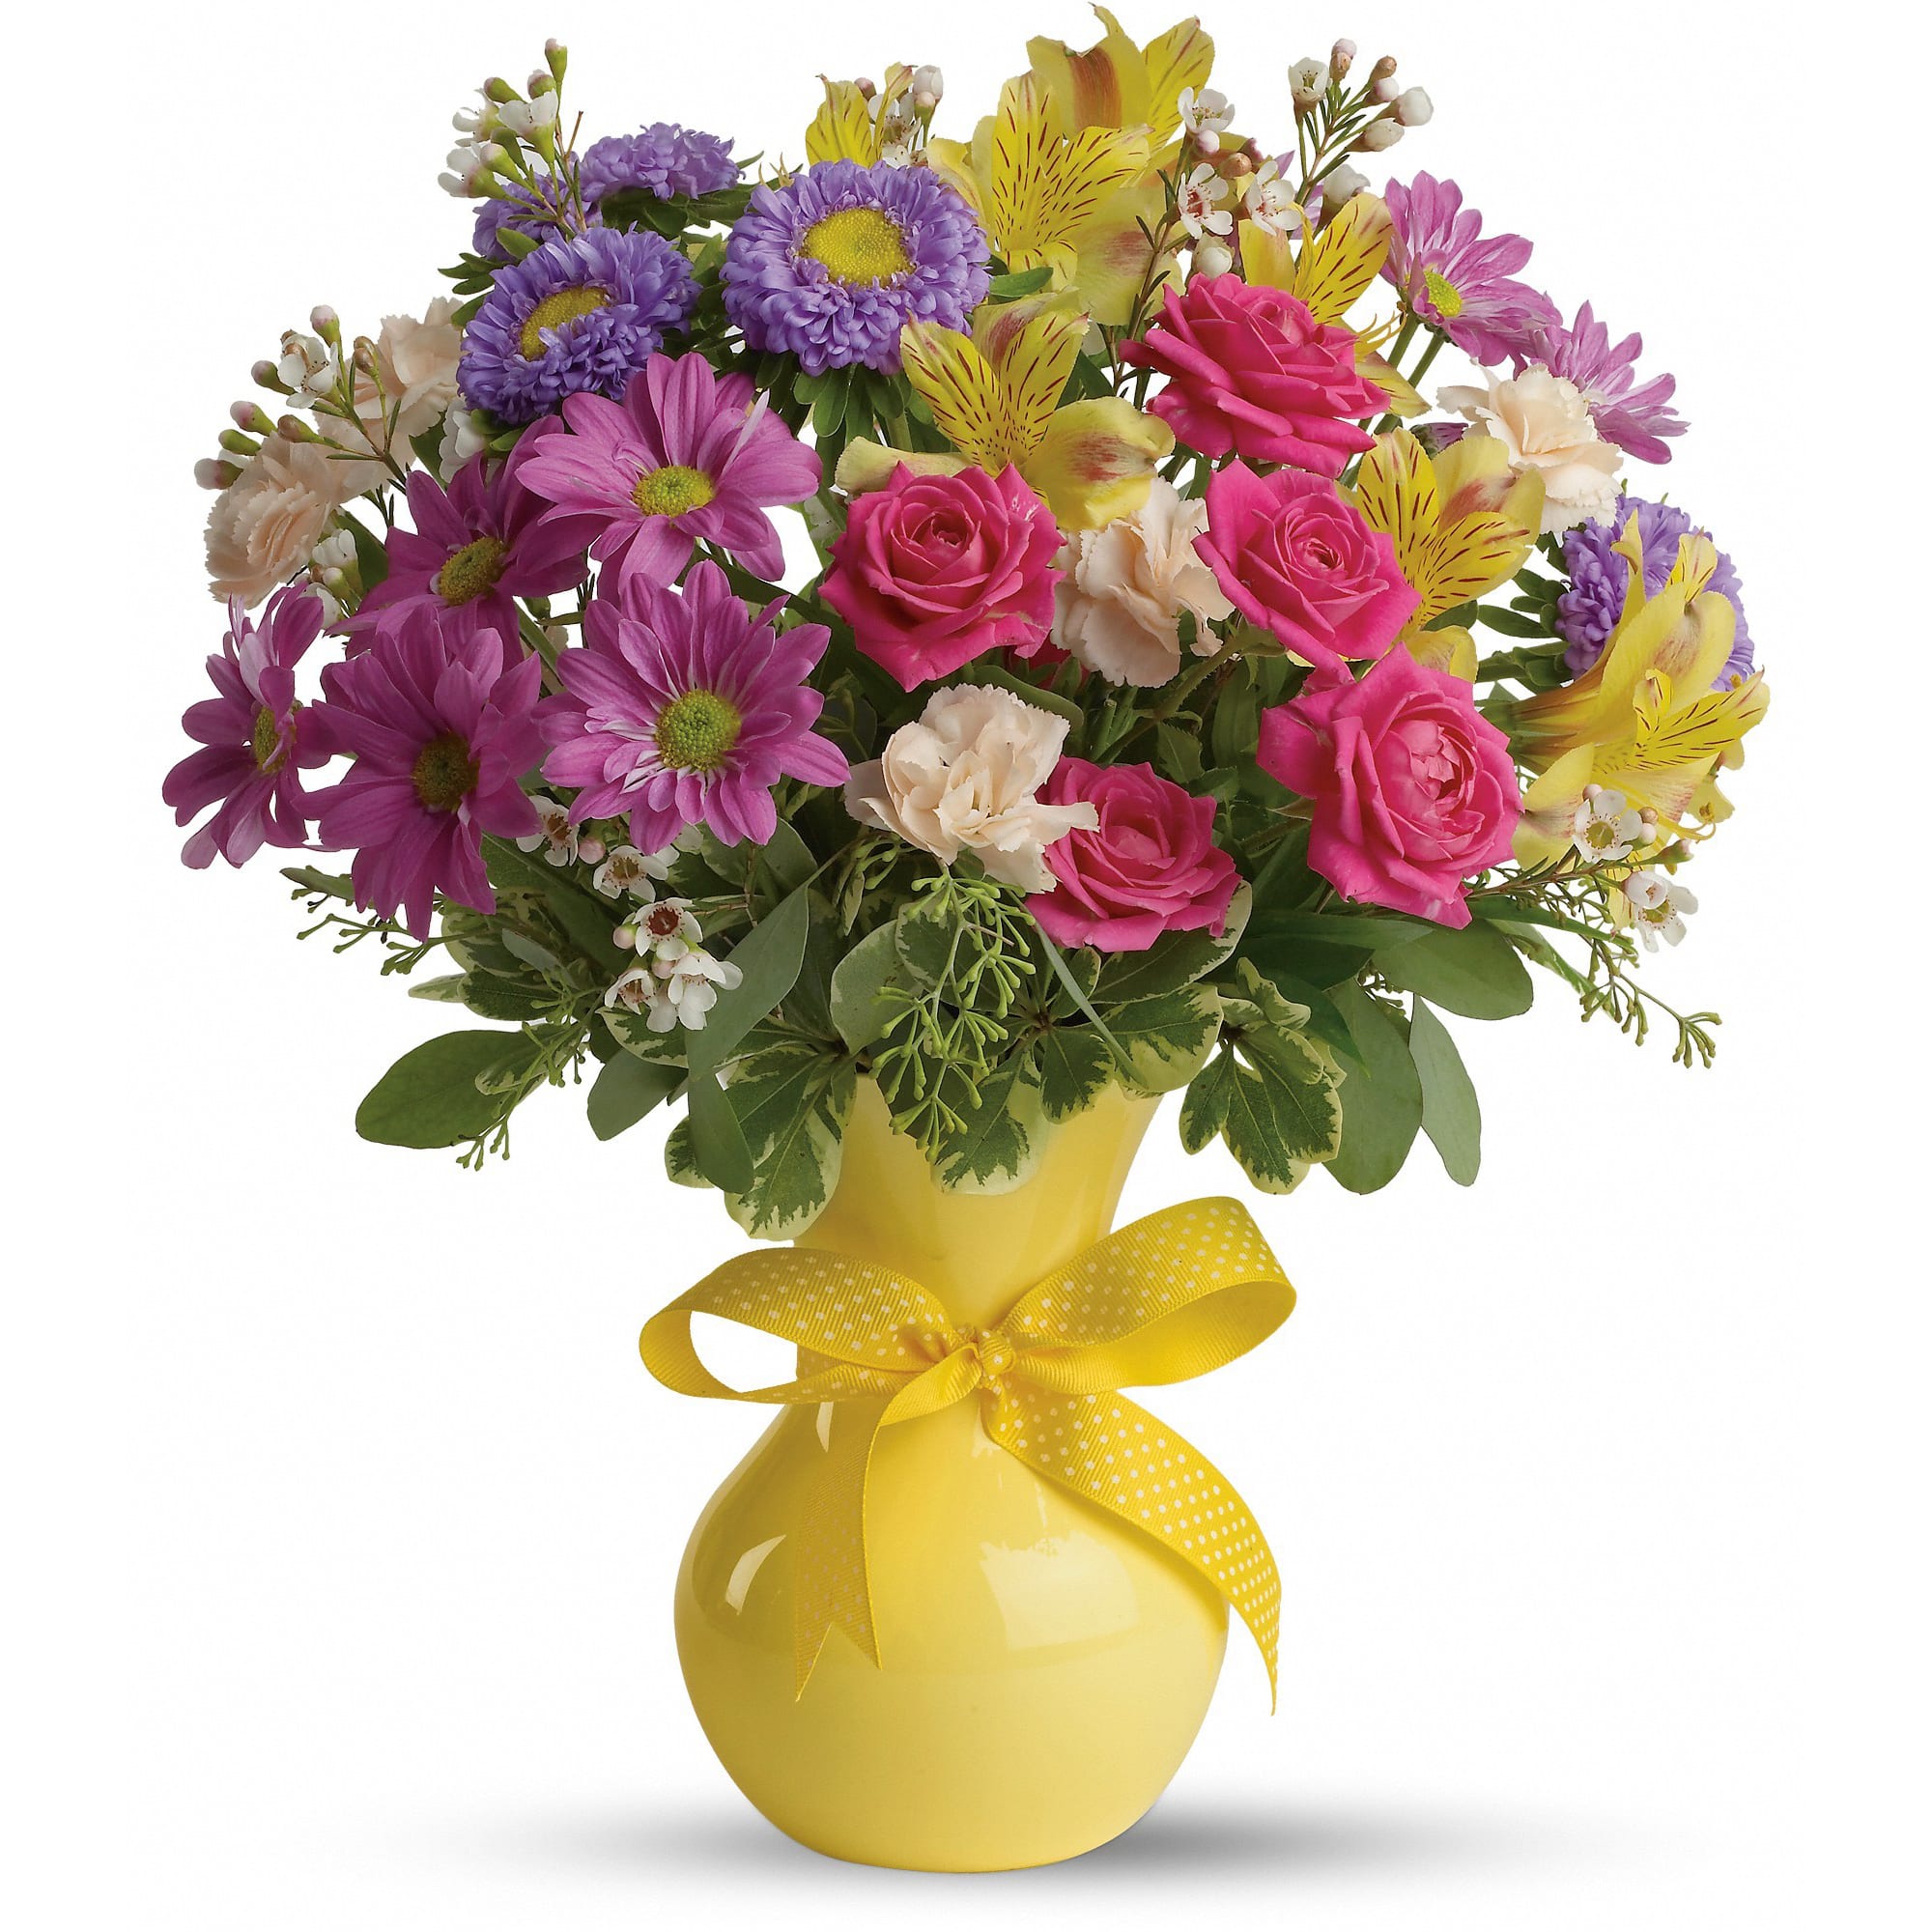 Teleflora's Color It Happy  - Whichever season of the year, this charming bouquet is like a breath of spring. A gorgeous multicolored bouquet in a yellow vase tied with a yellow ribbon - couldn't be springier! 